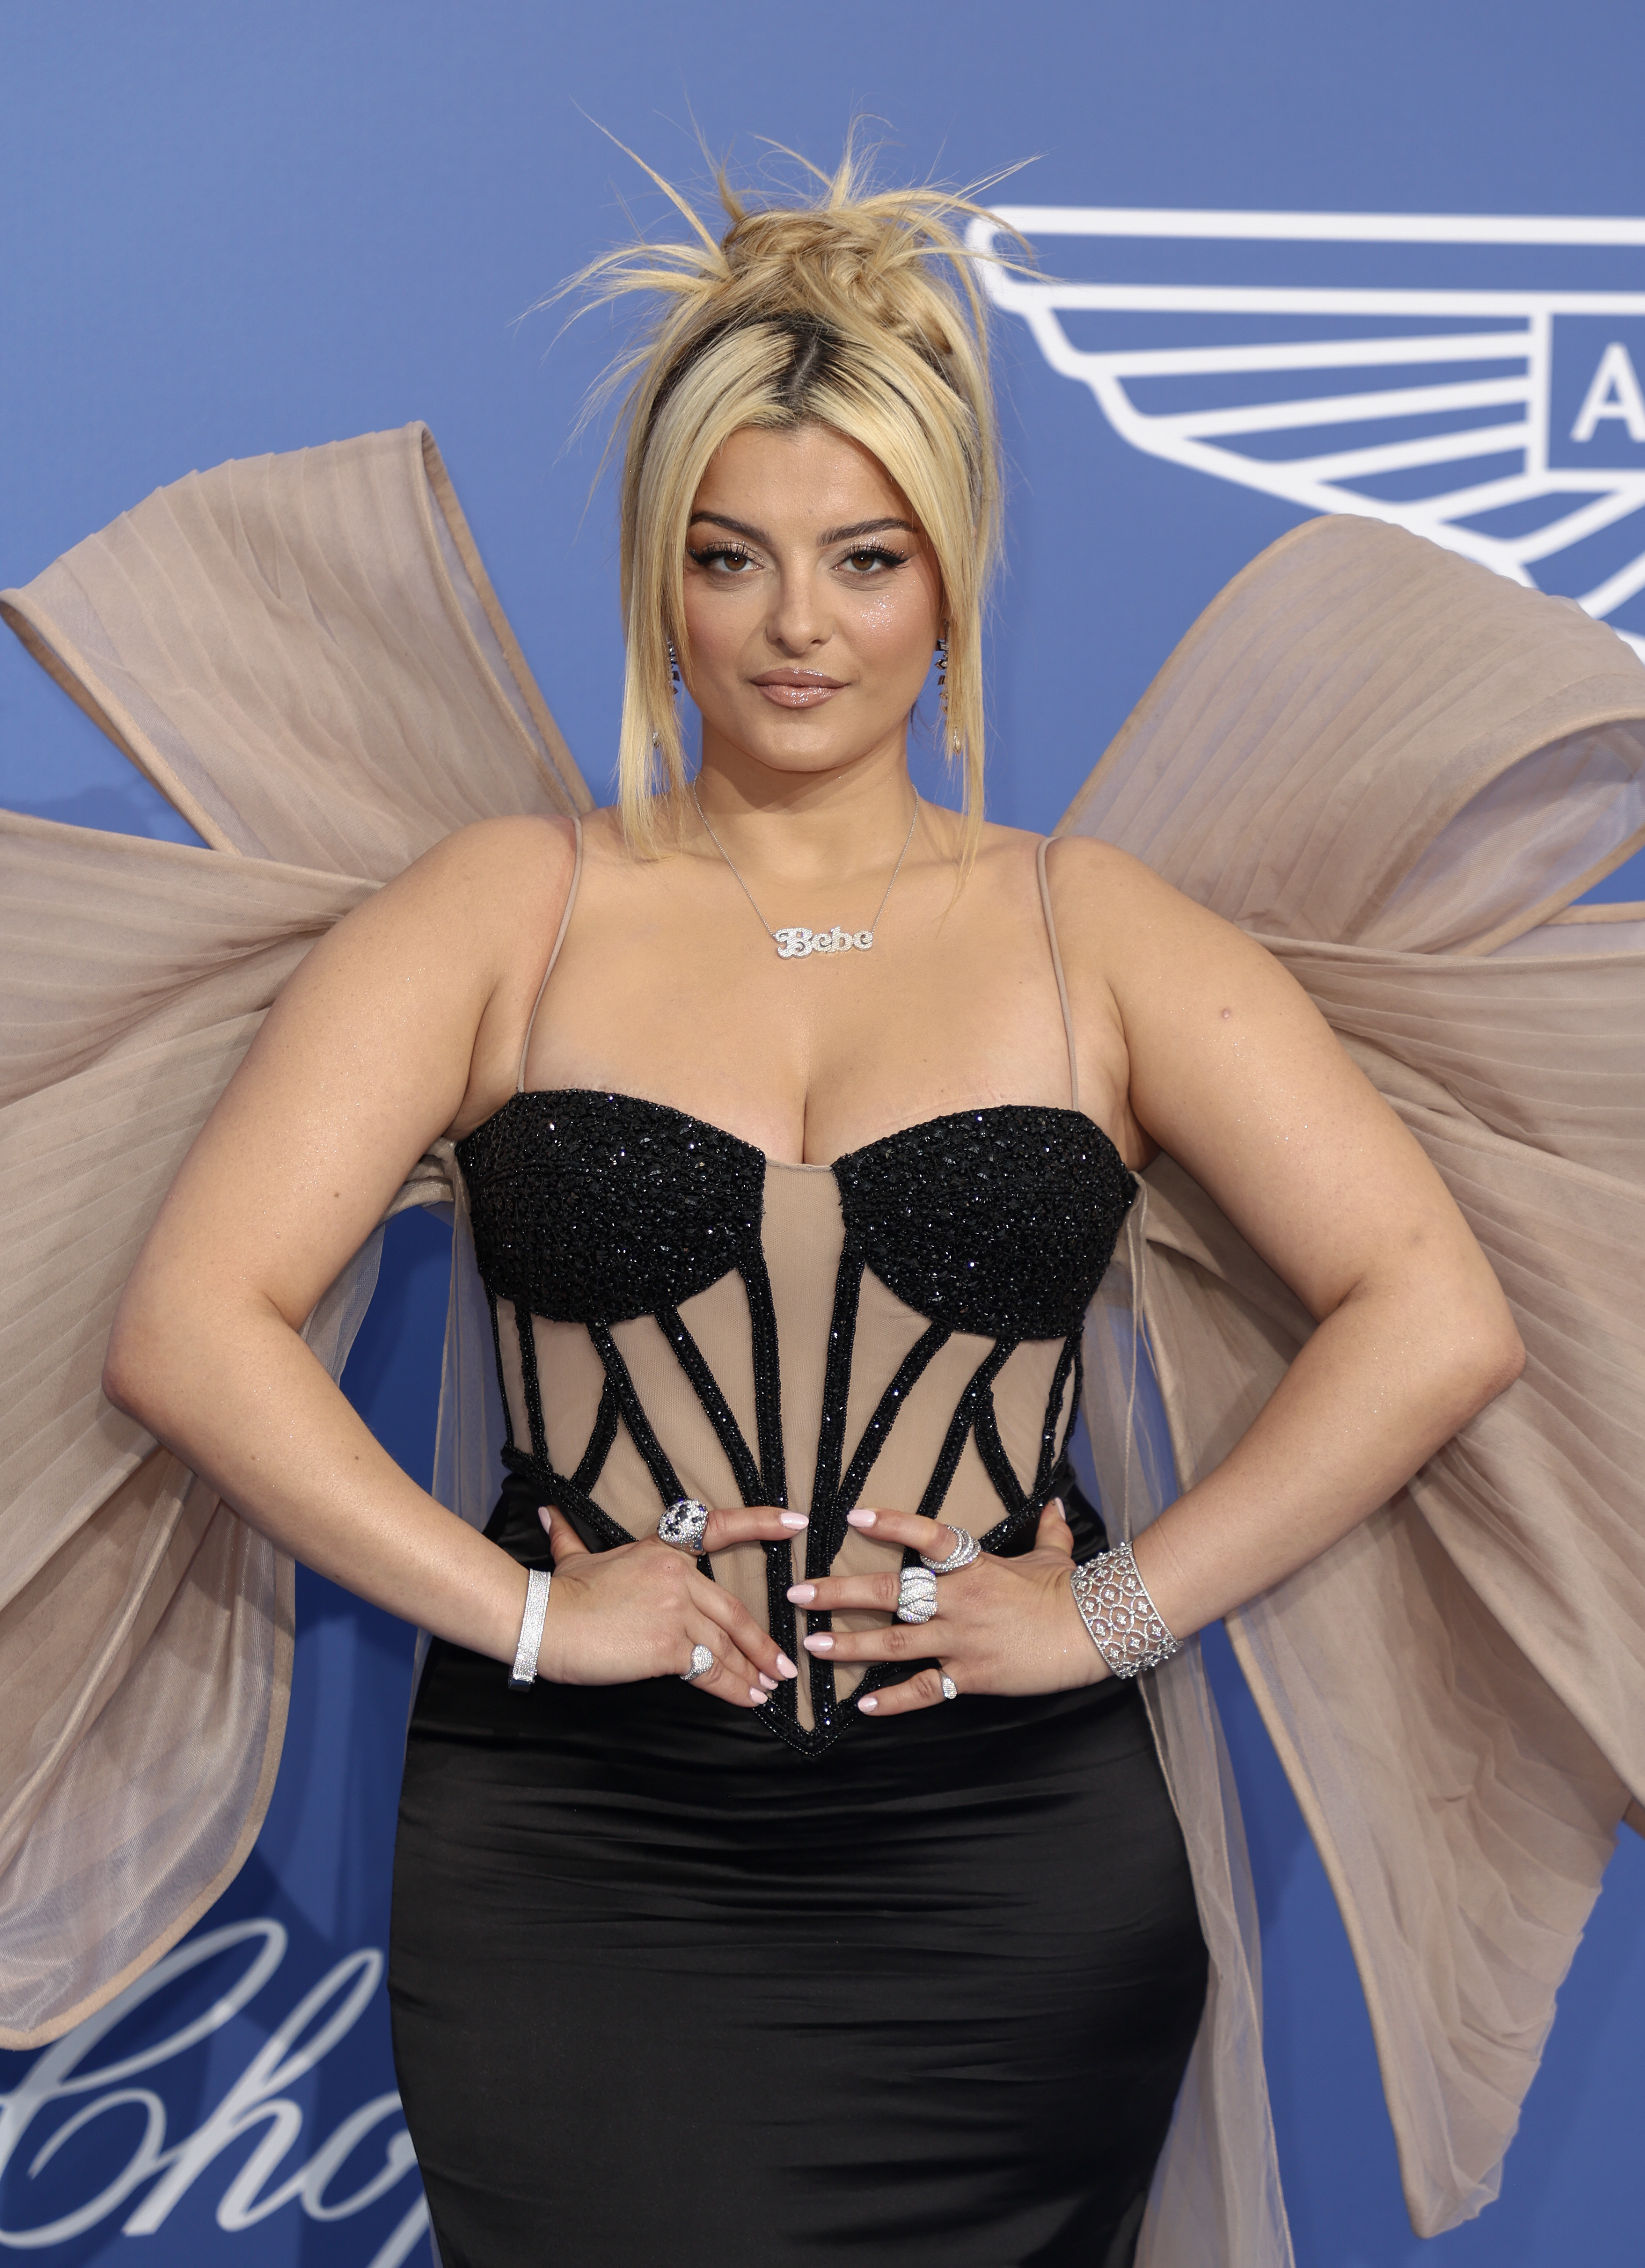 Bebe poses for photographers with her hands on her waist at a media event; she is wearing a corseted dress with a large bow on the back